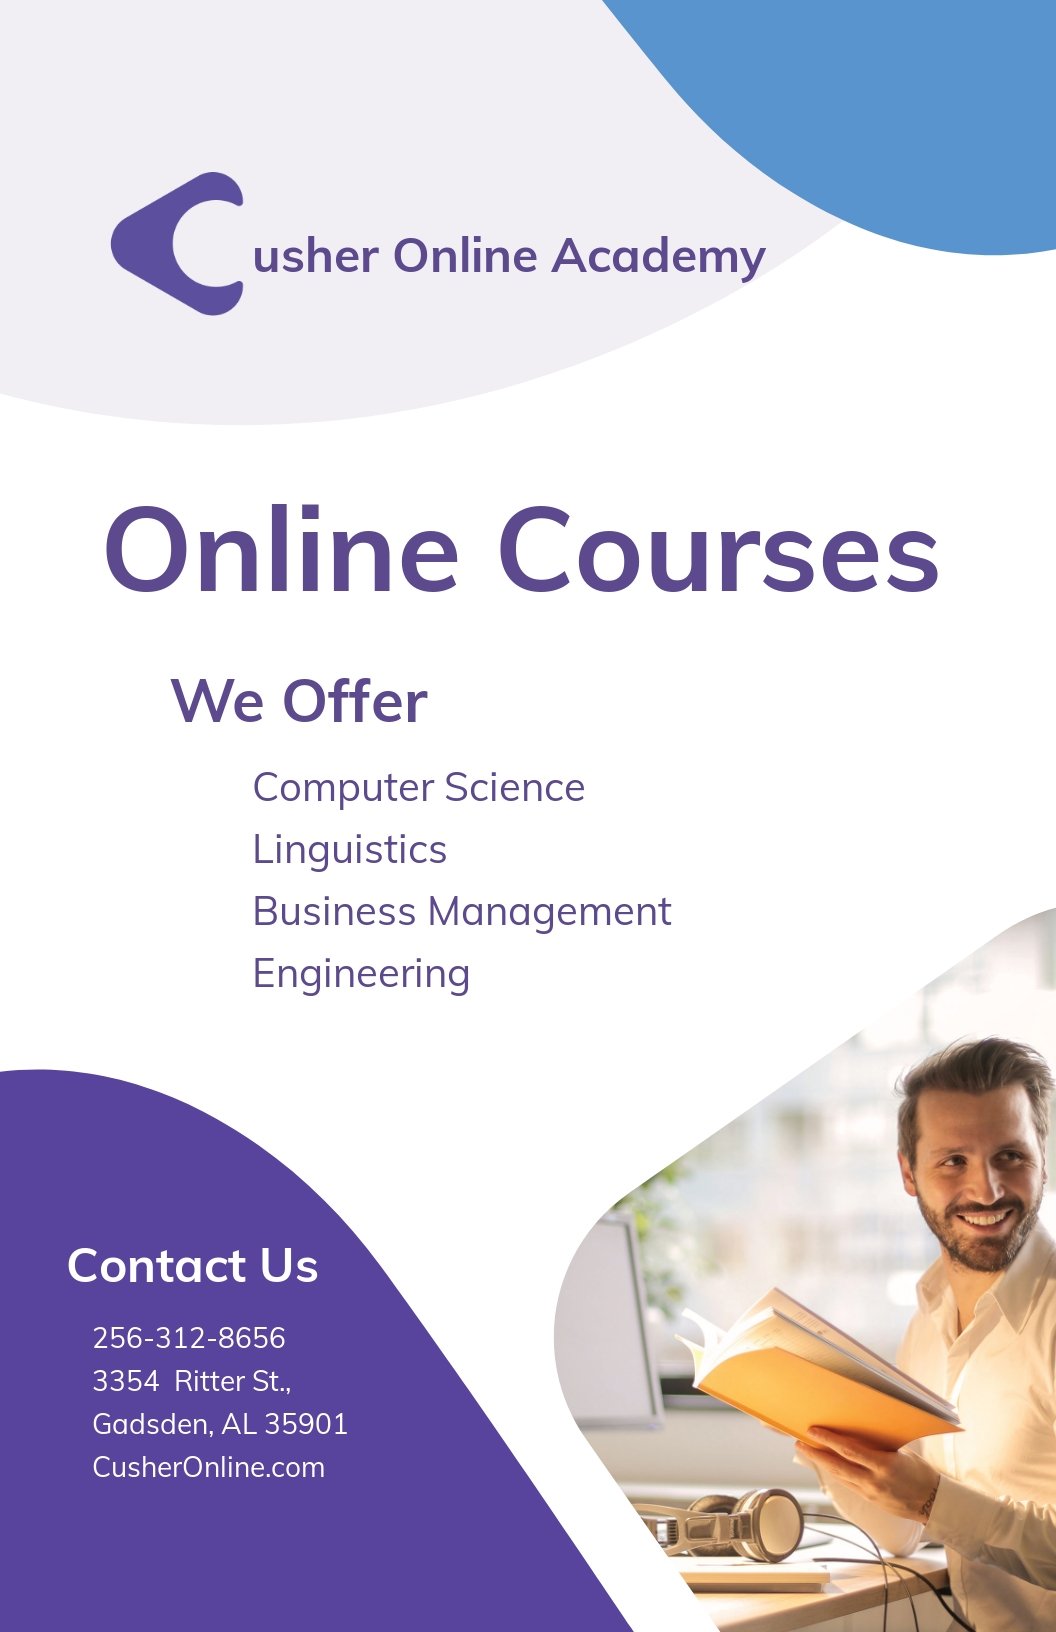 Online Courses Poster Template [Free JPG] Illustrator, InDesign, Word